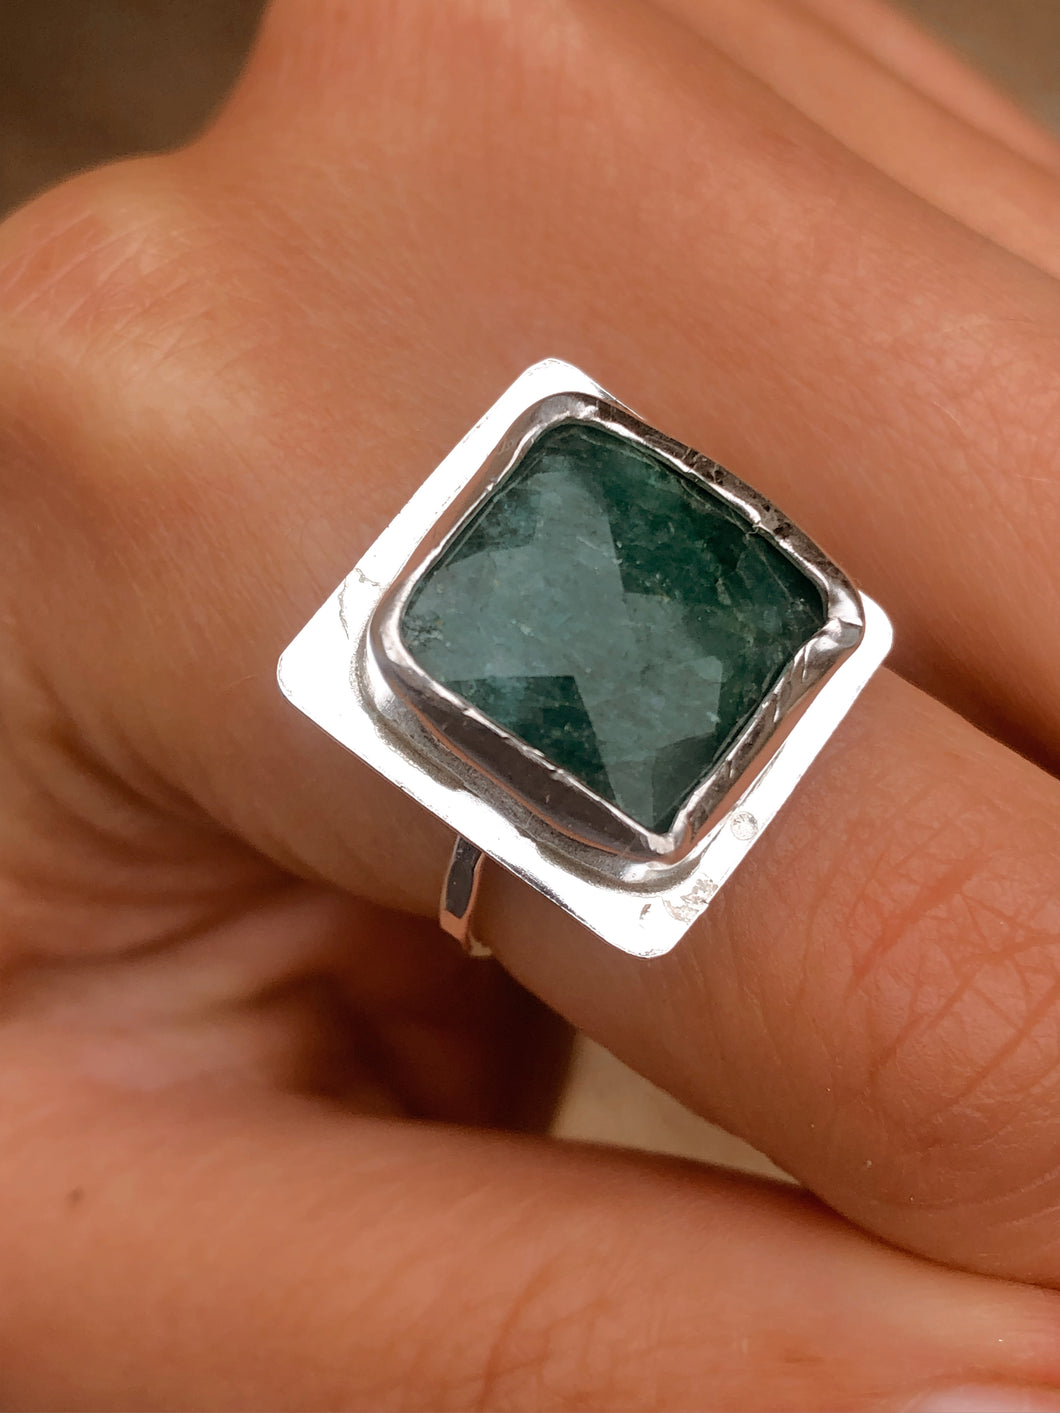 The Emerald Ring